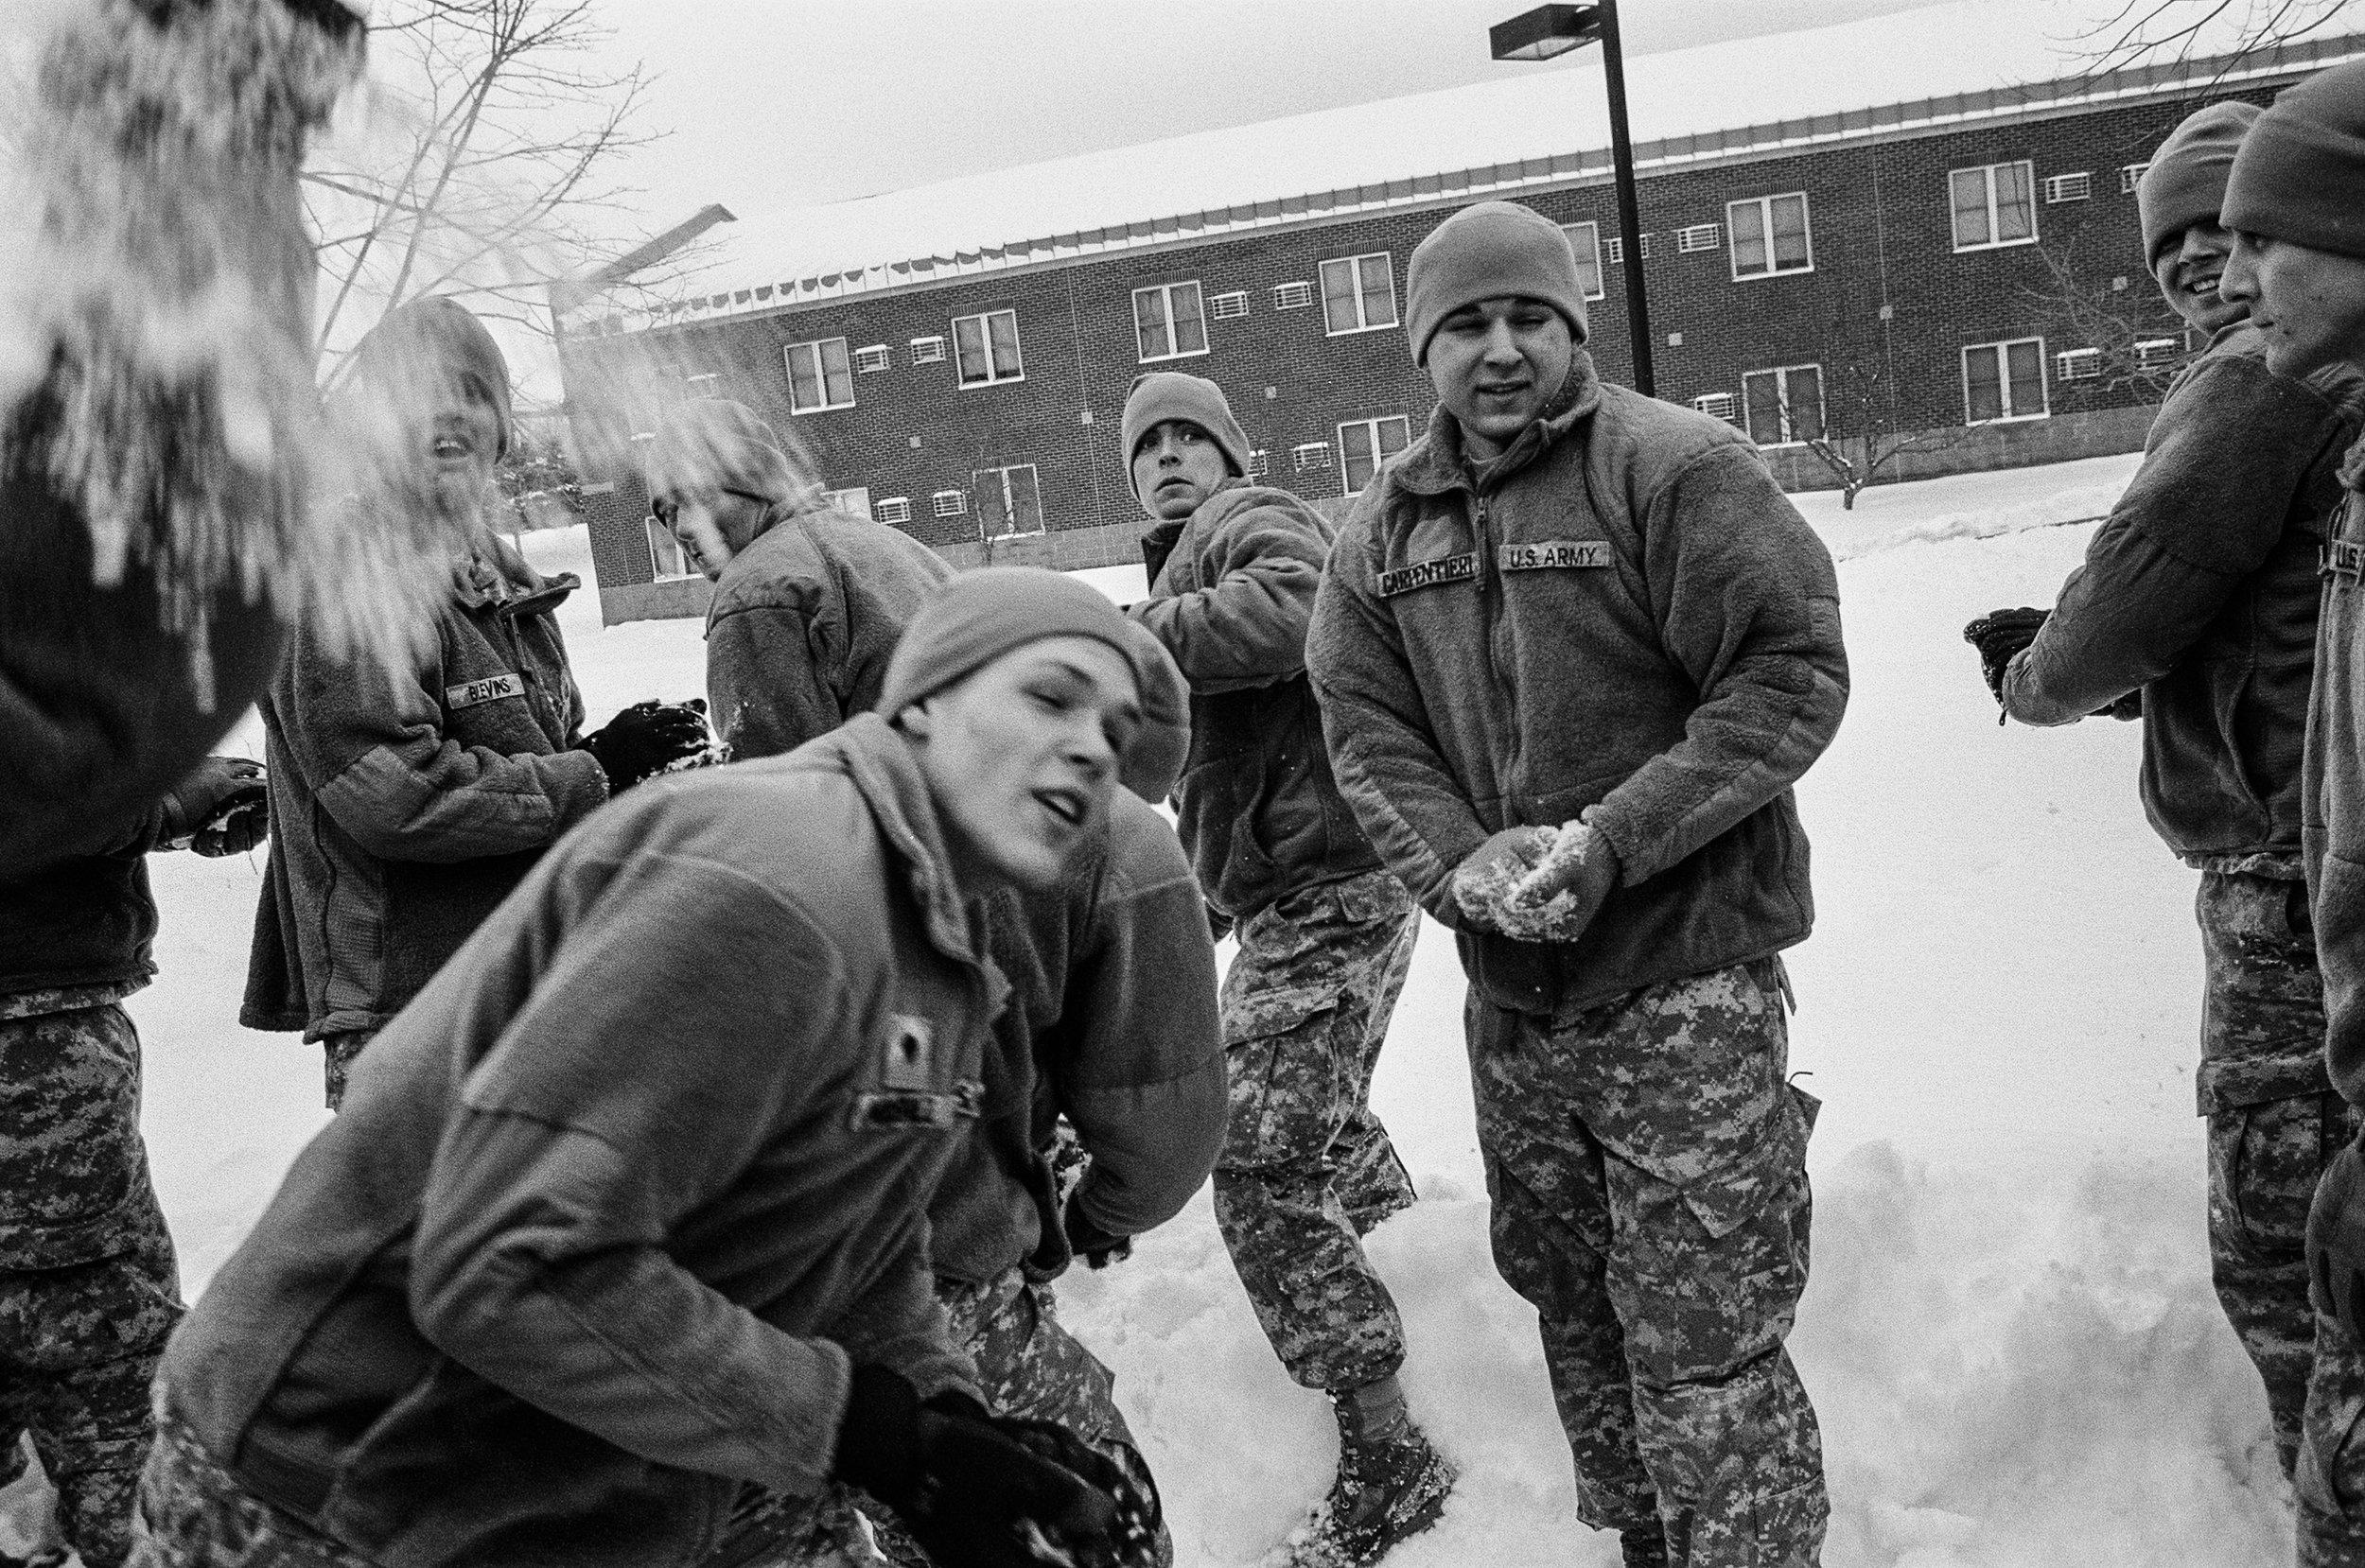  Soldiers of Bravo Company,&nbsp;1-32nd Infantry Regiment have a snowball fight after being released for the weekend at the 10th Mountain Division base, Fort Drum, New York,&nbsp;2010. 